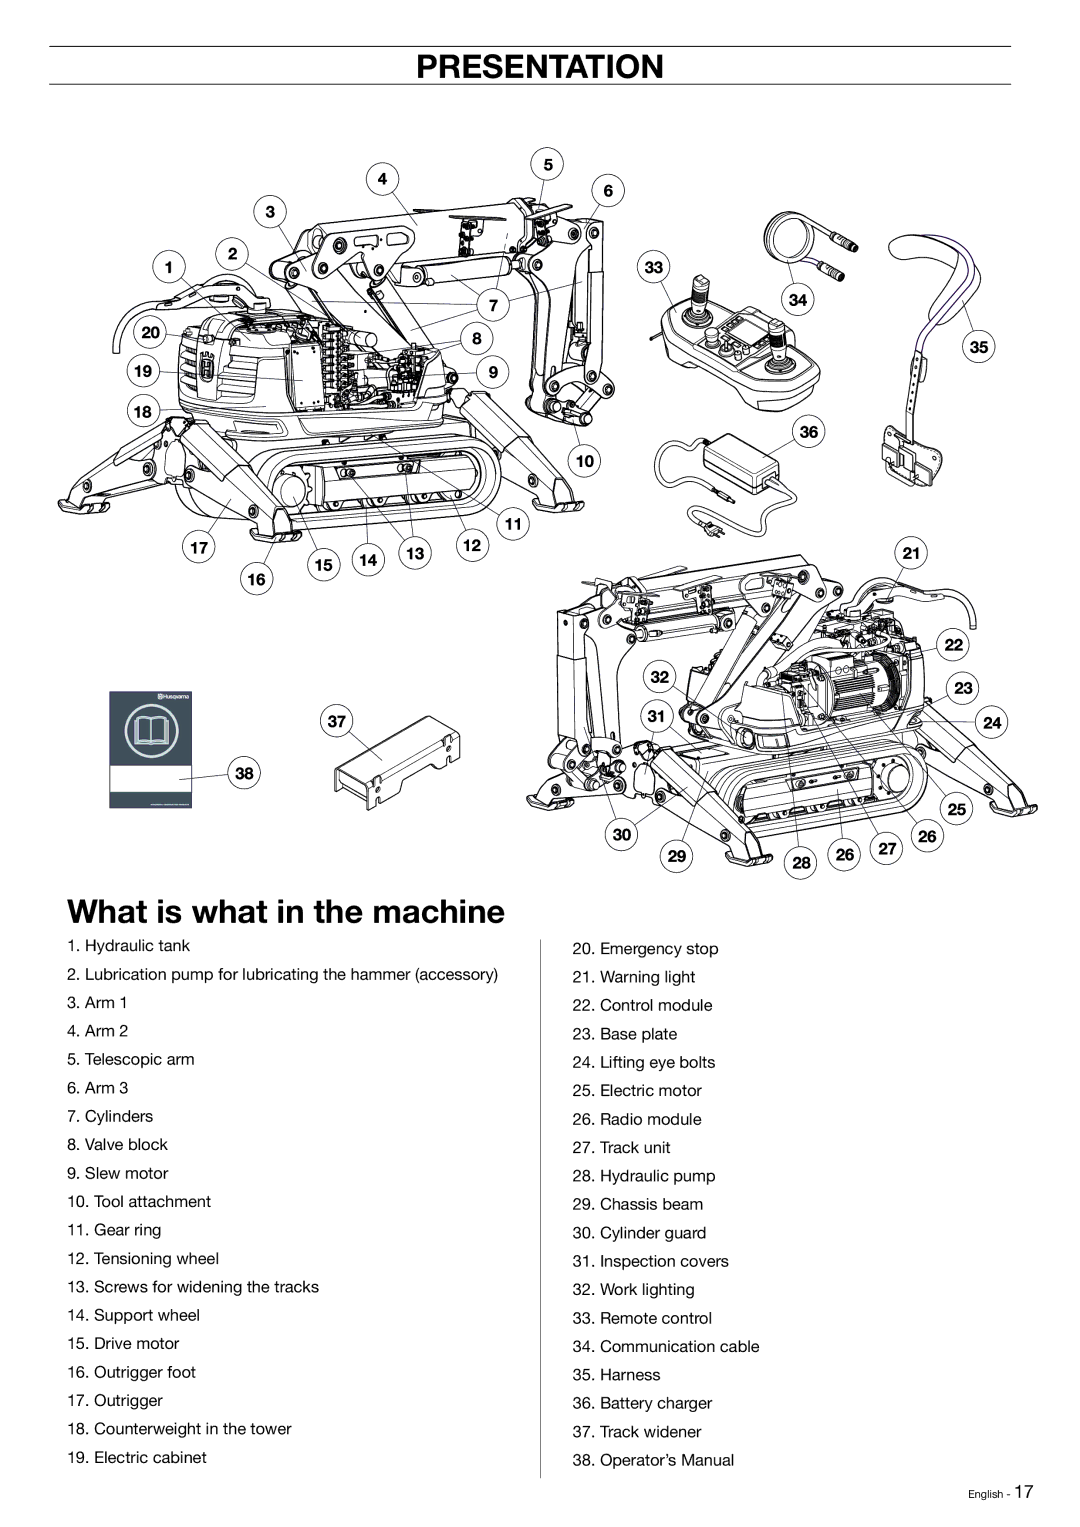 Husqvarna DXR-310 manual What is what in the machine 